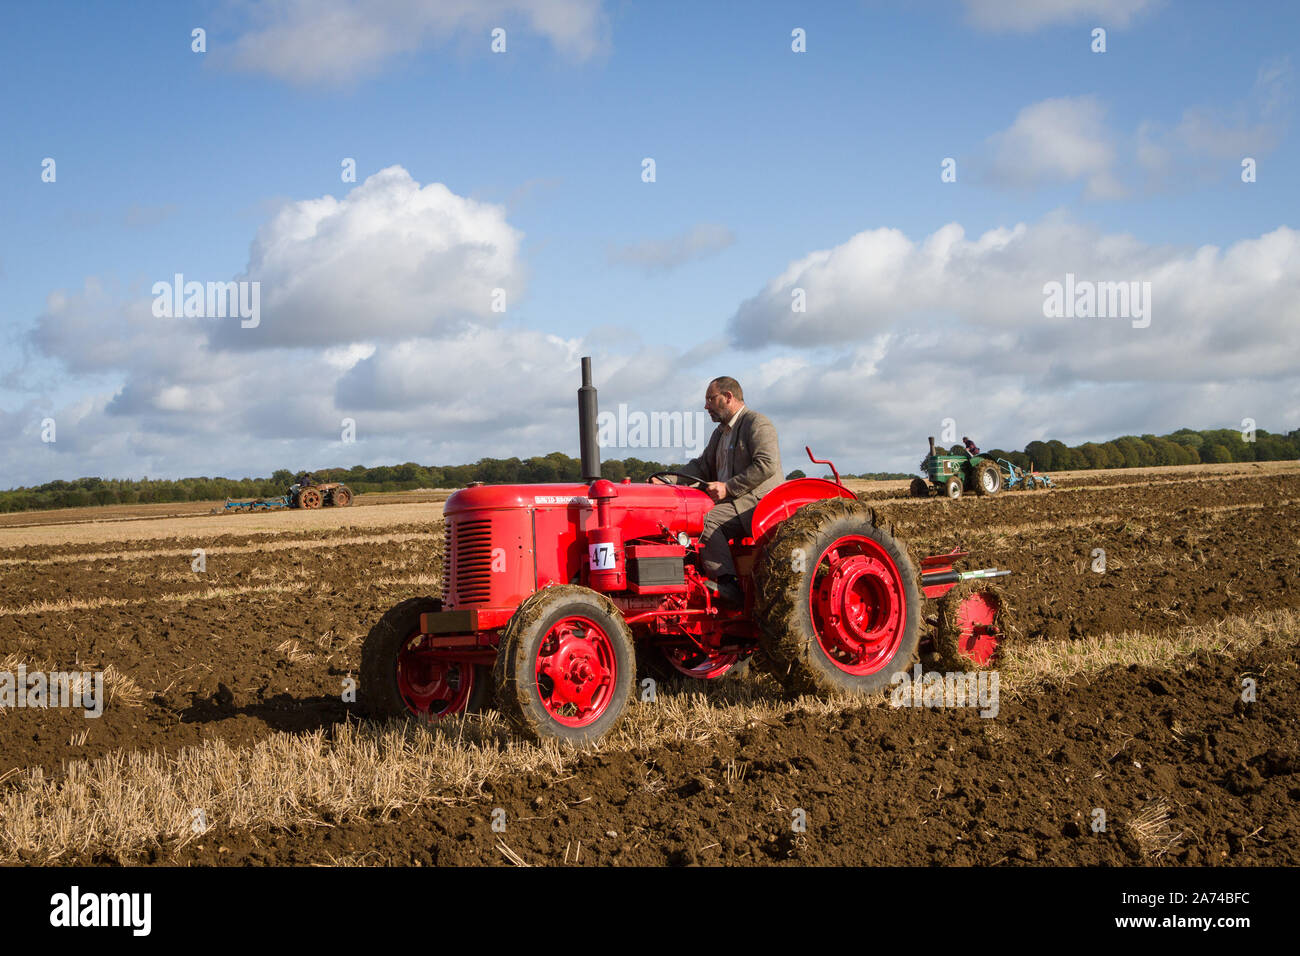 A vintage David Brown tractor at a ploughing match at Ipsden on the edge of the Chilterns under a blue sky and Cumulus clouds Stock Photo